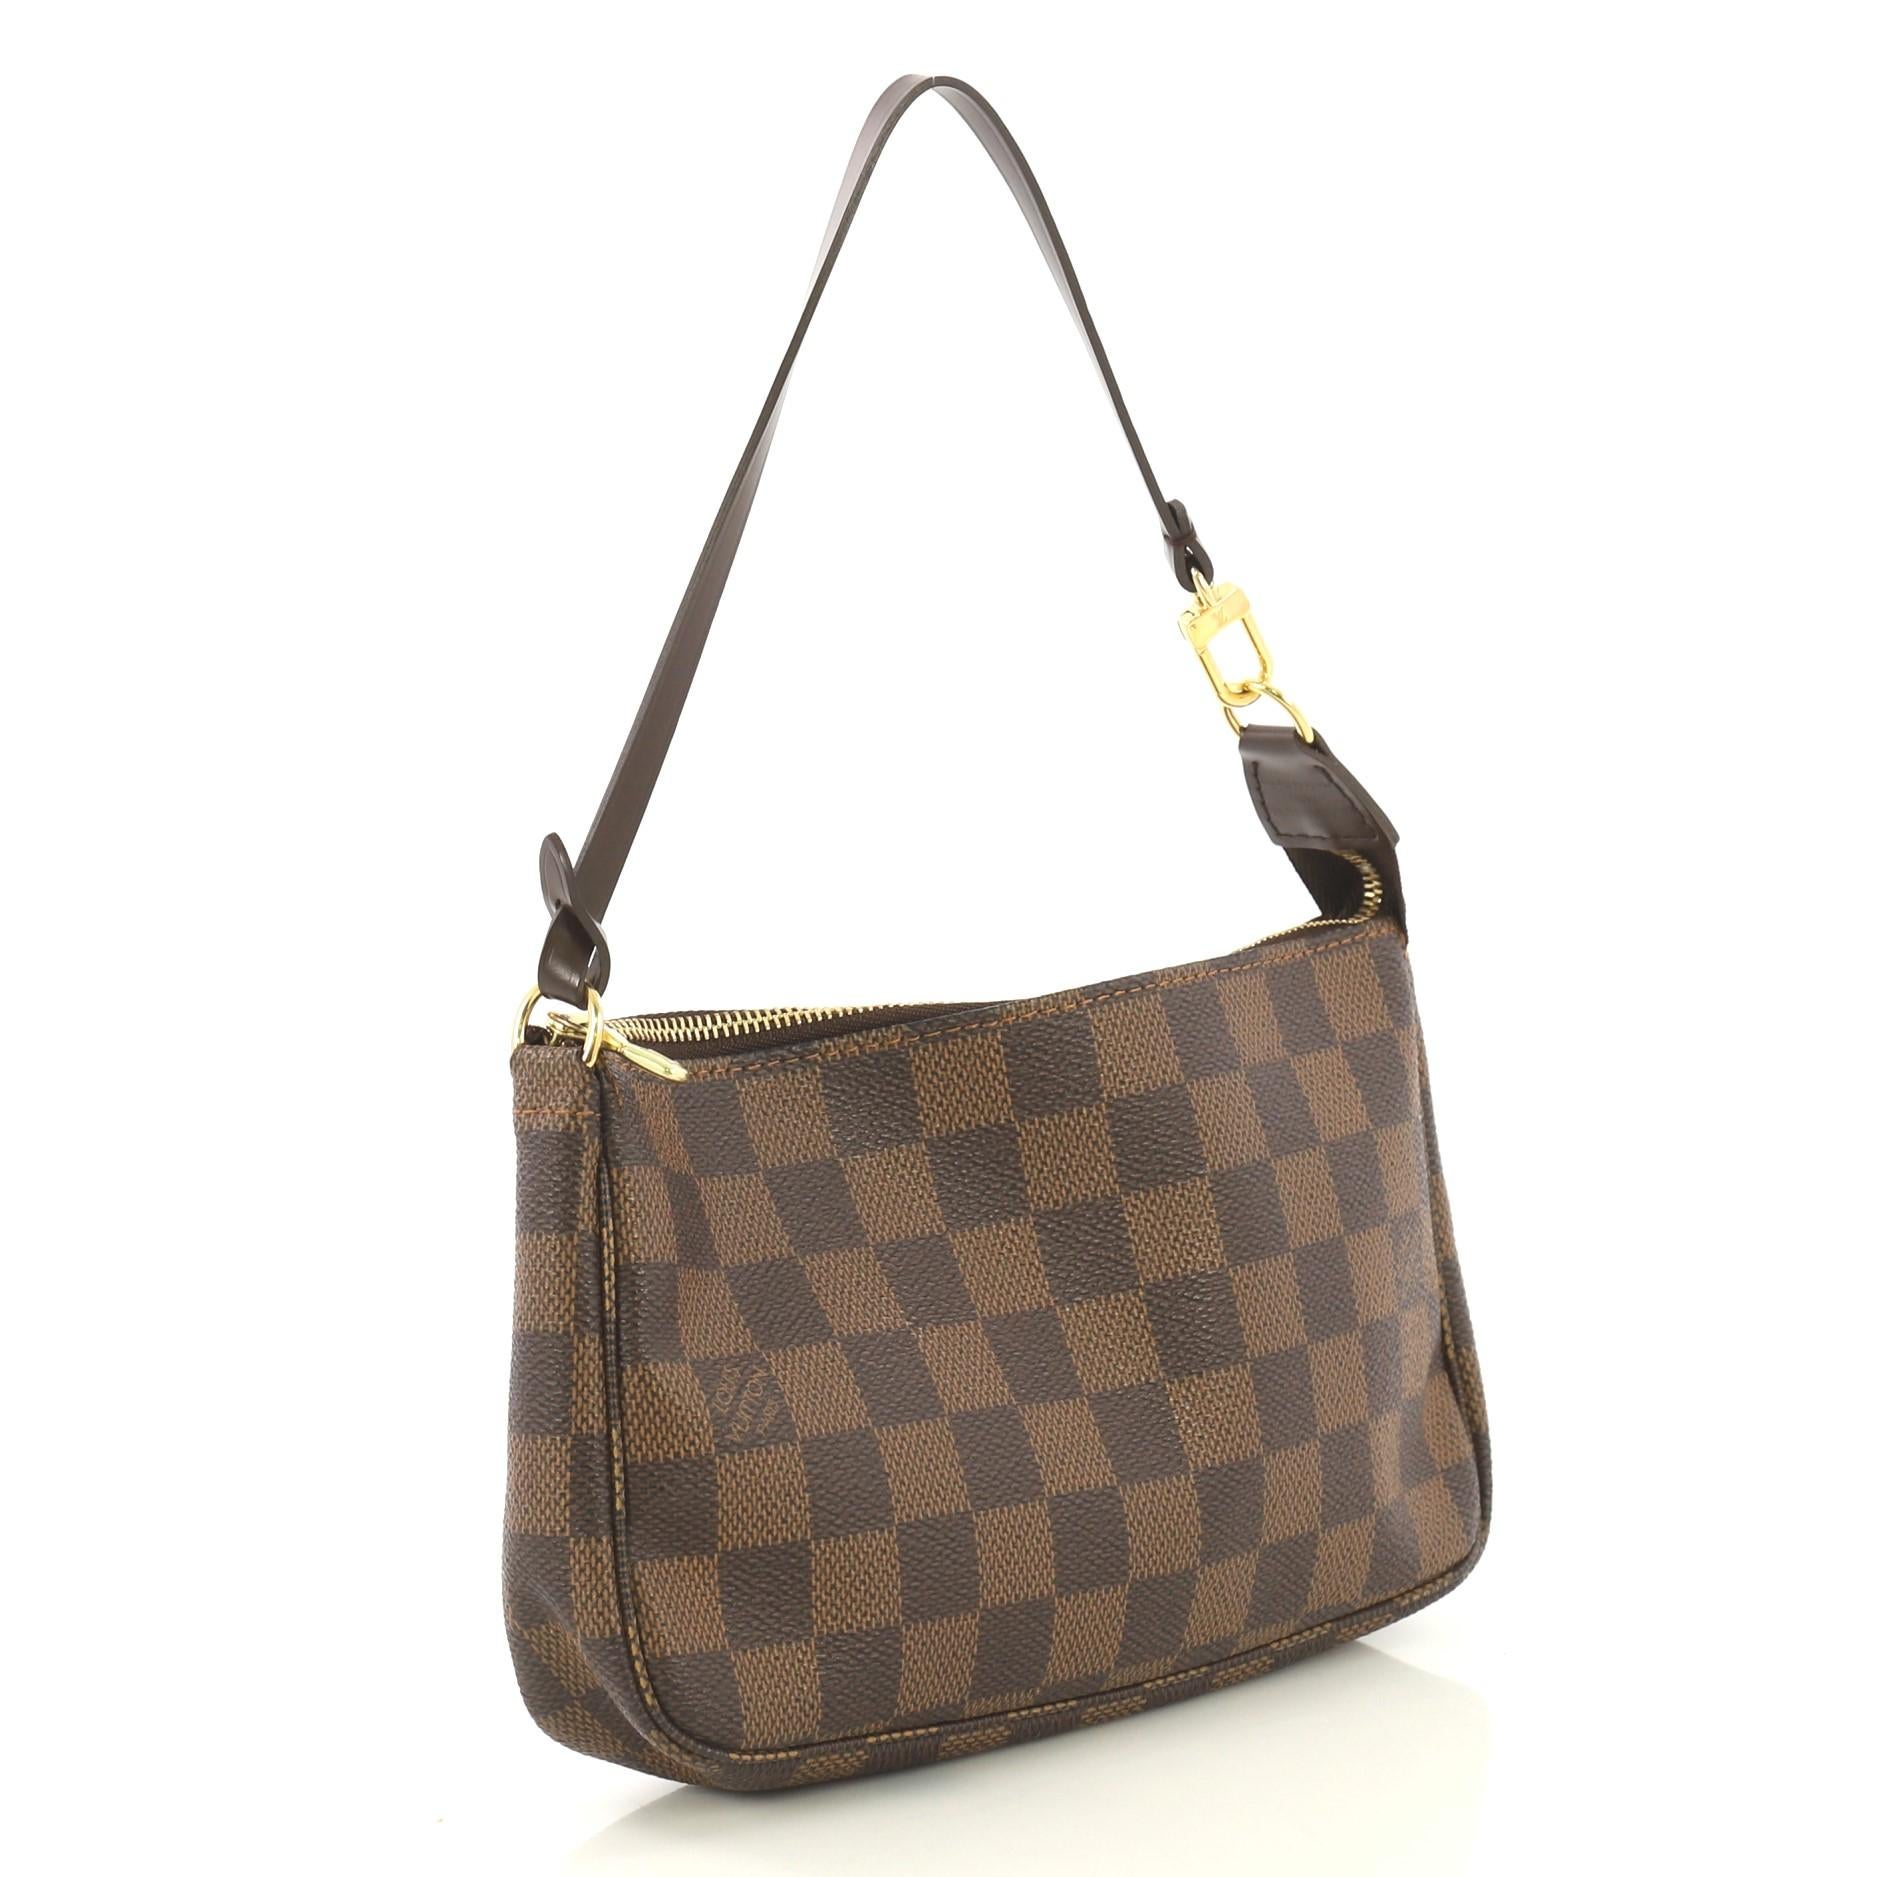 This Louis Vuitton Pochette Accessoires Damier, crafted from damier ebene coated canvas, features a flat leather strap and gold-tone hardware. Its zip closure opens to a red fabric interior. Authenticity code reads: CA1006. 

Estimated Retail Price: